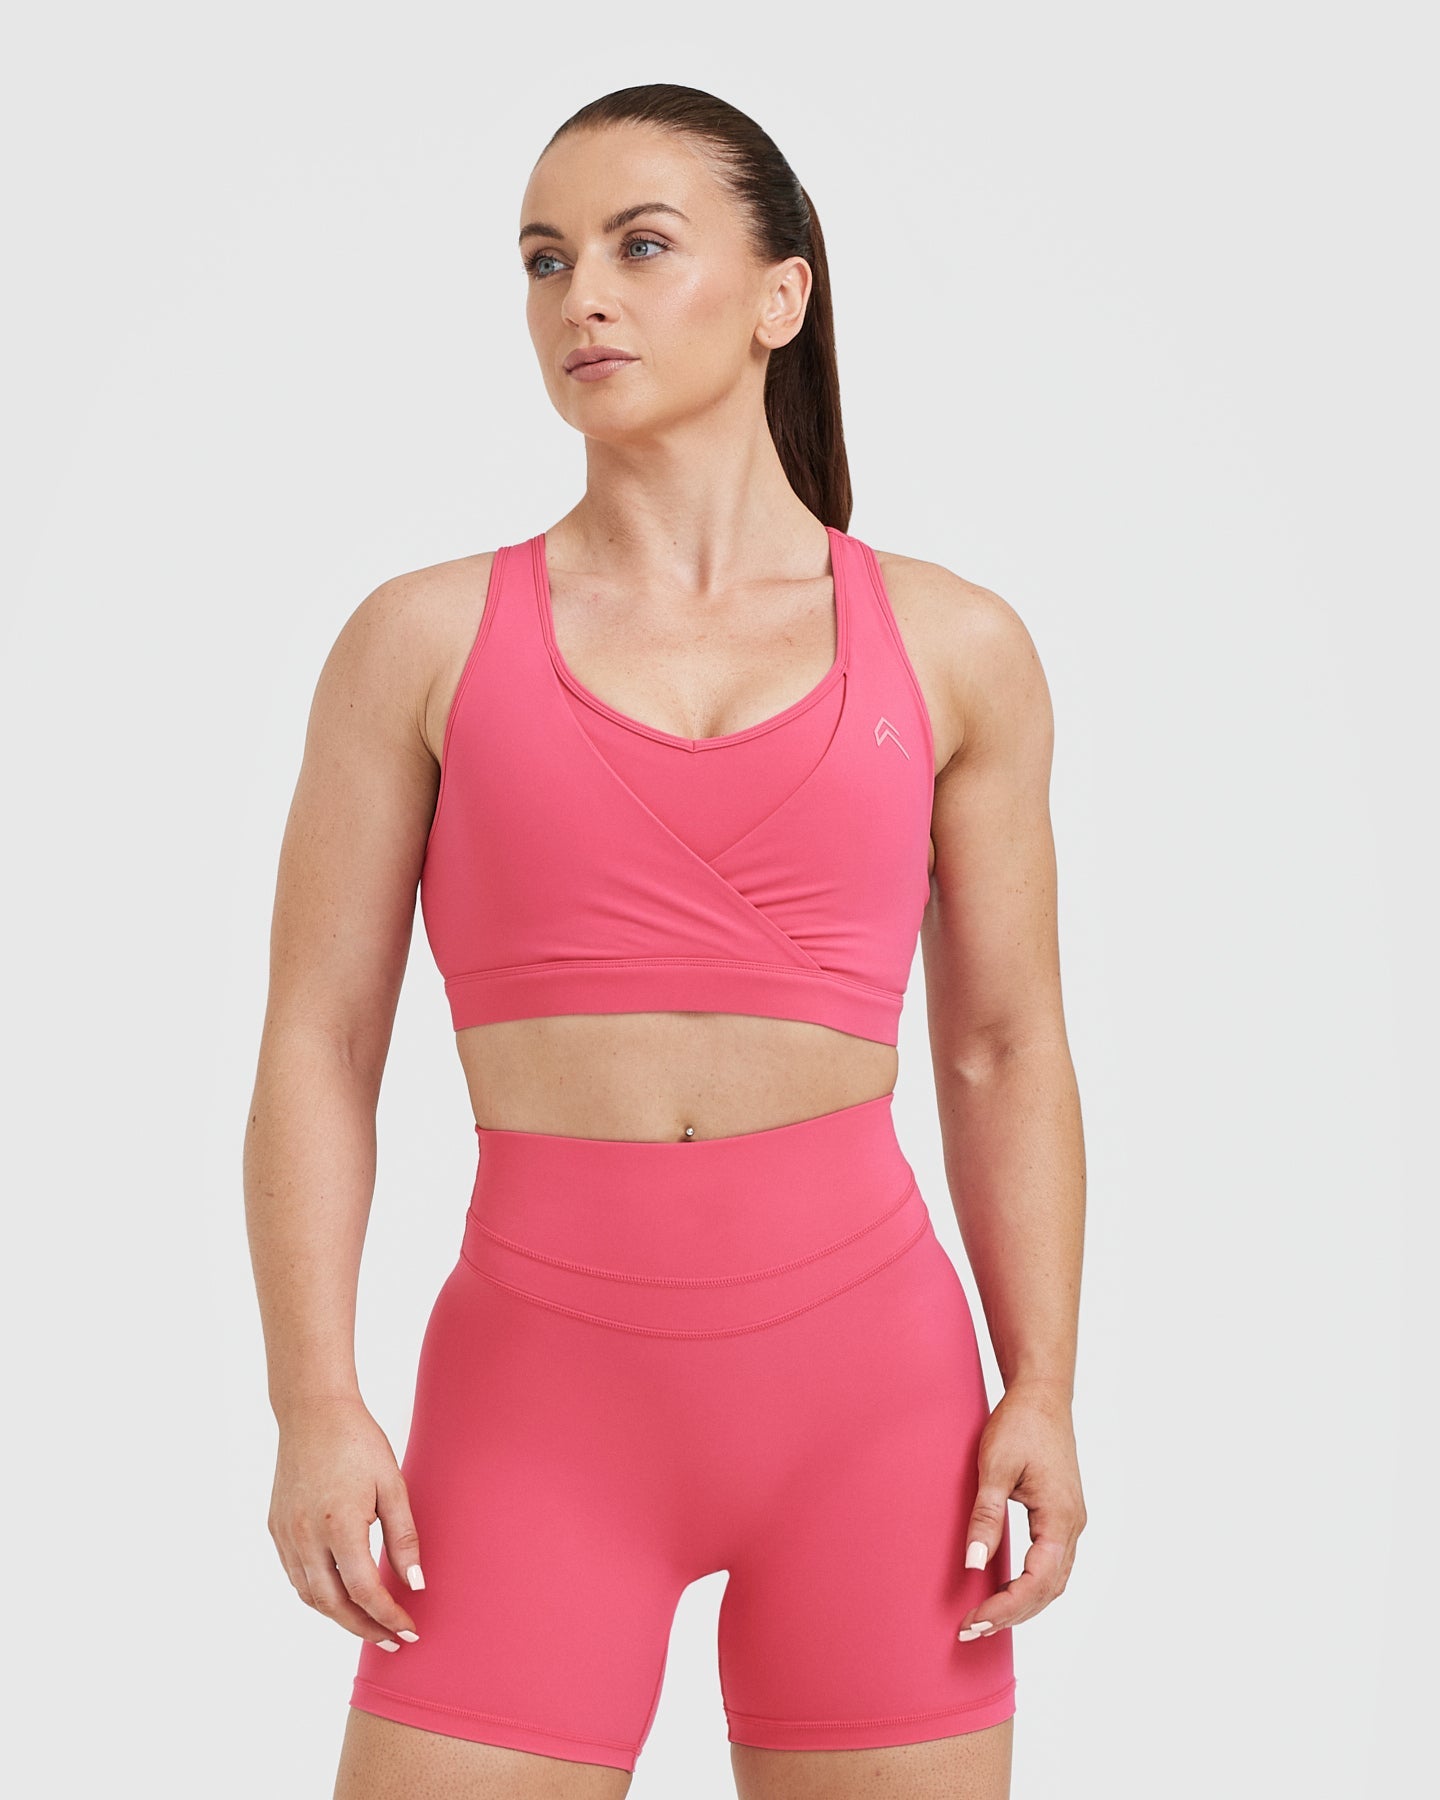 PINKCLOVER Athletic Support Band – SportsBra